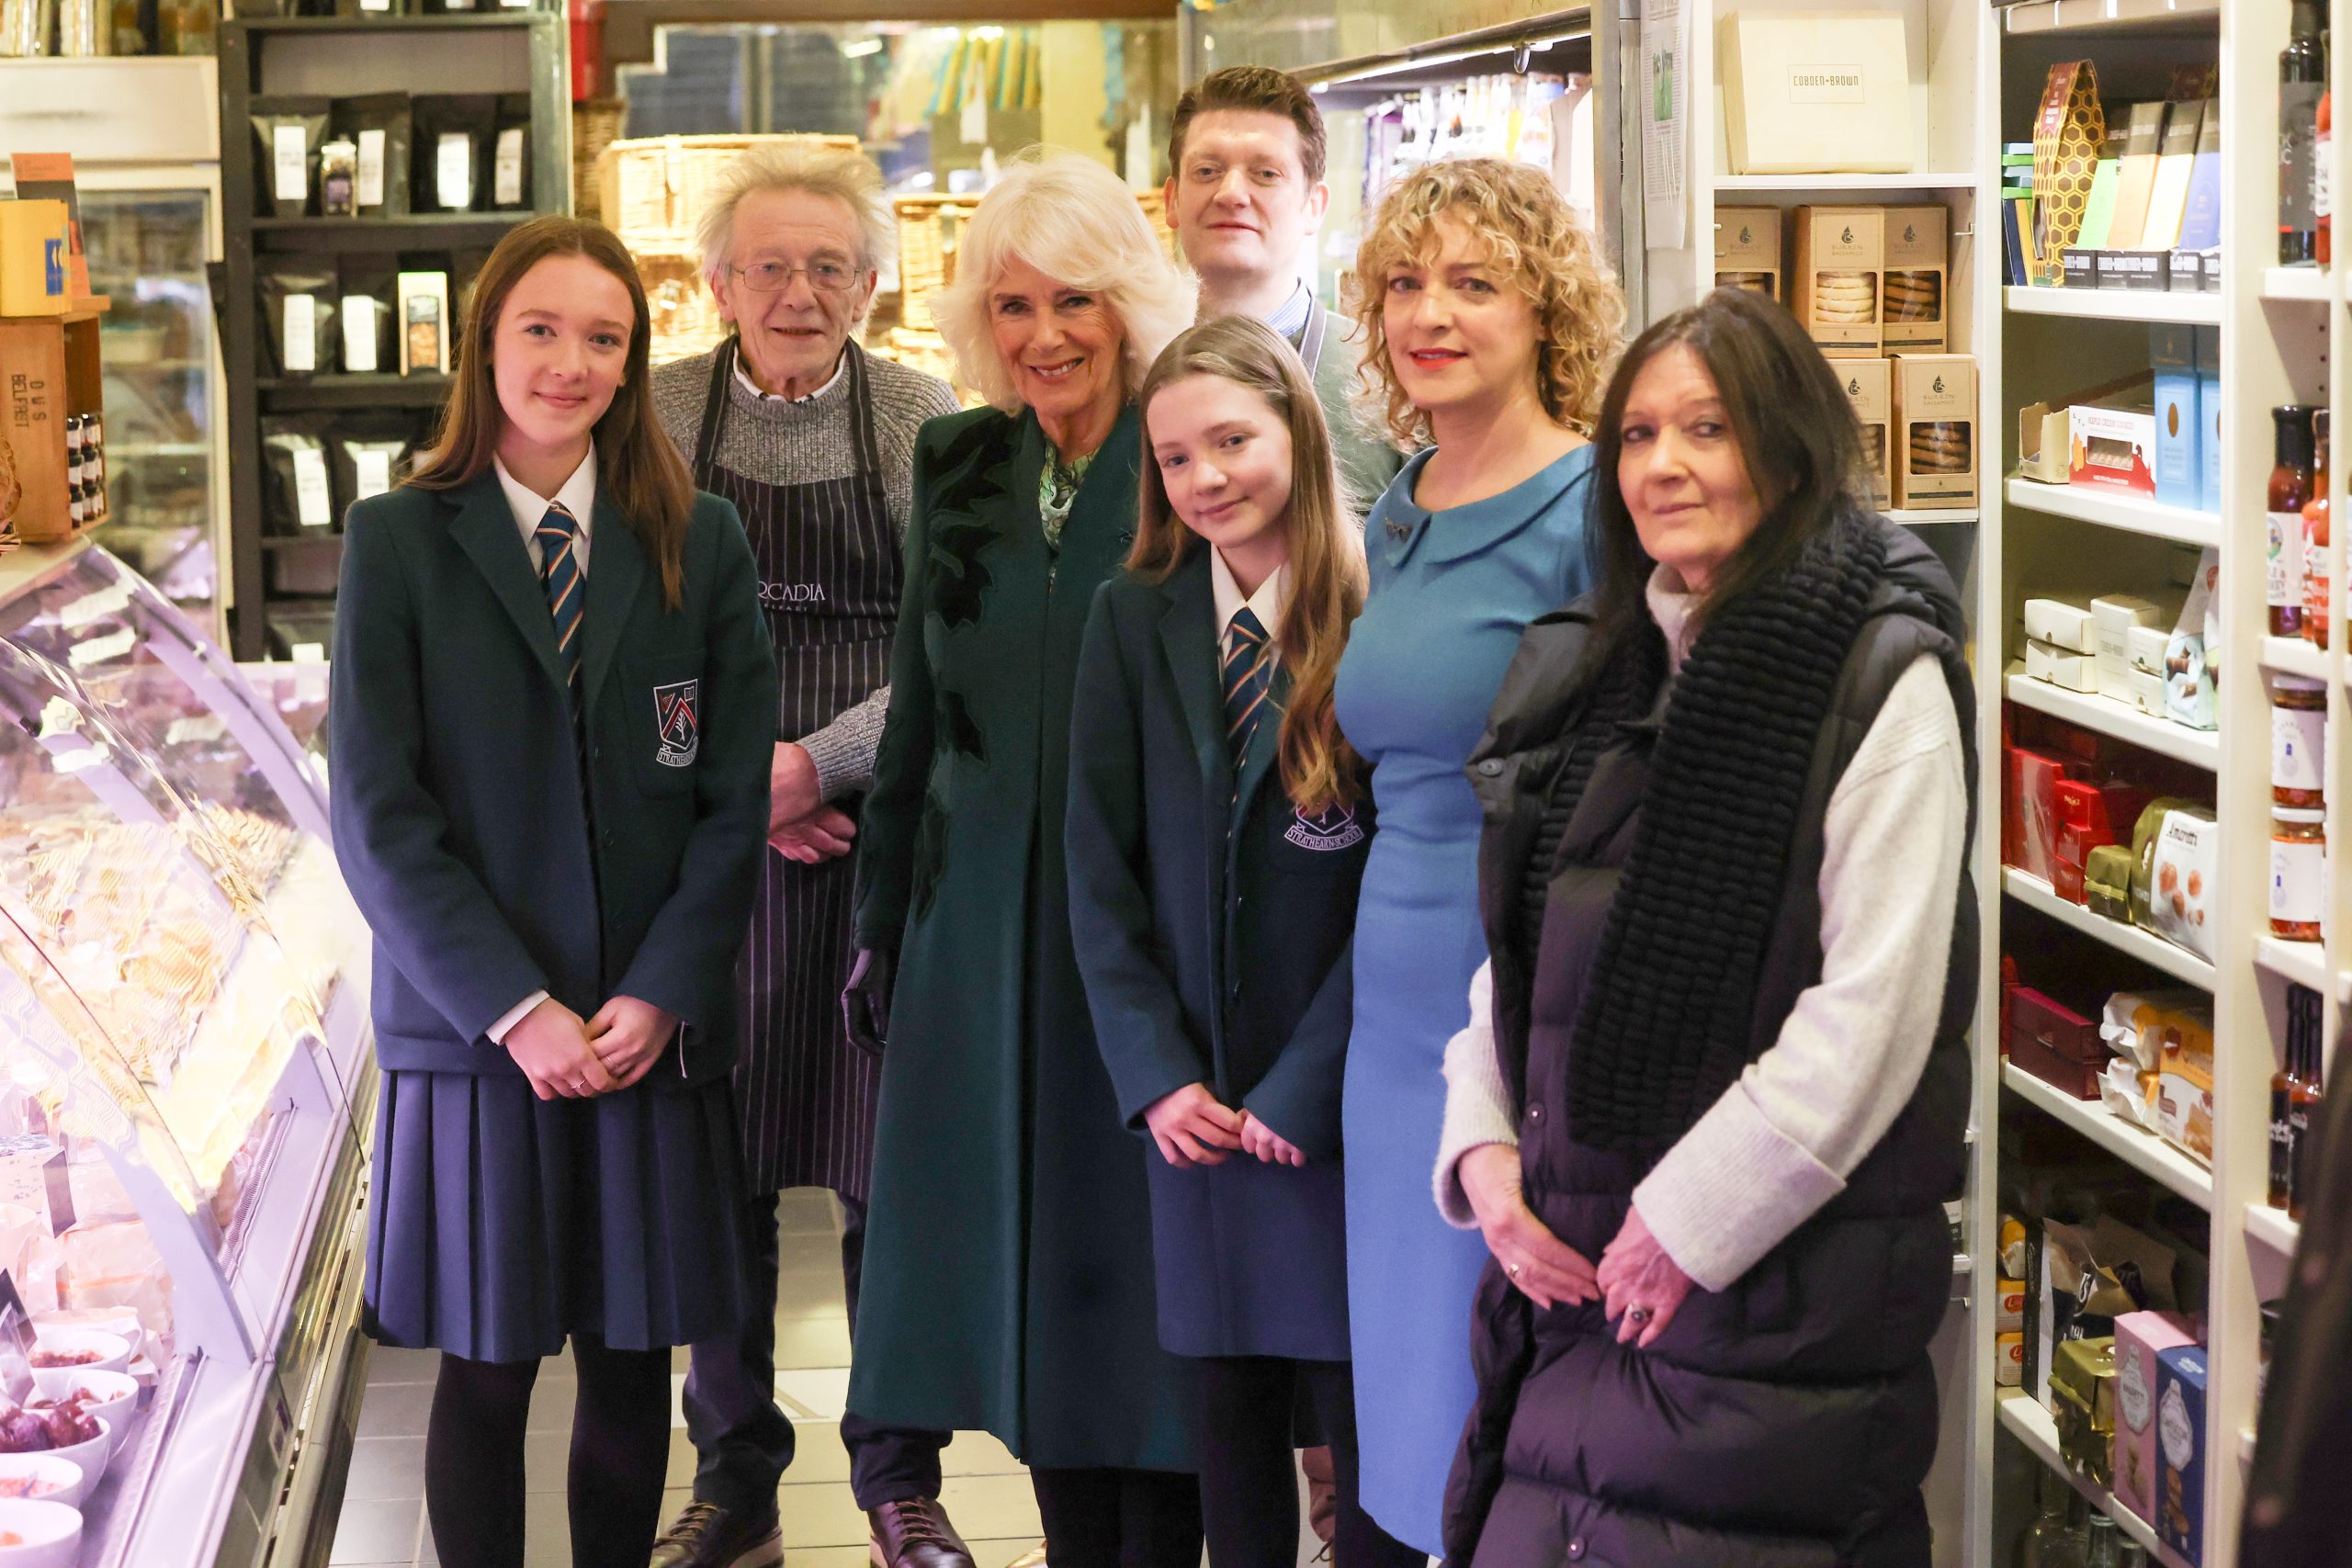 Independent retailer’s delight at playing part of Royal visit